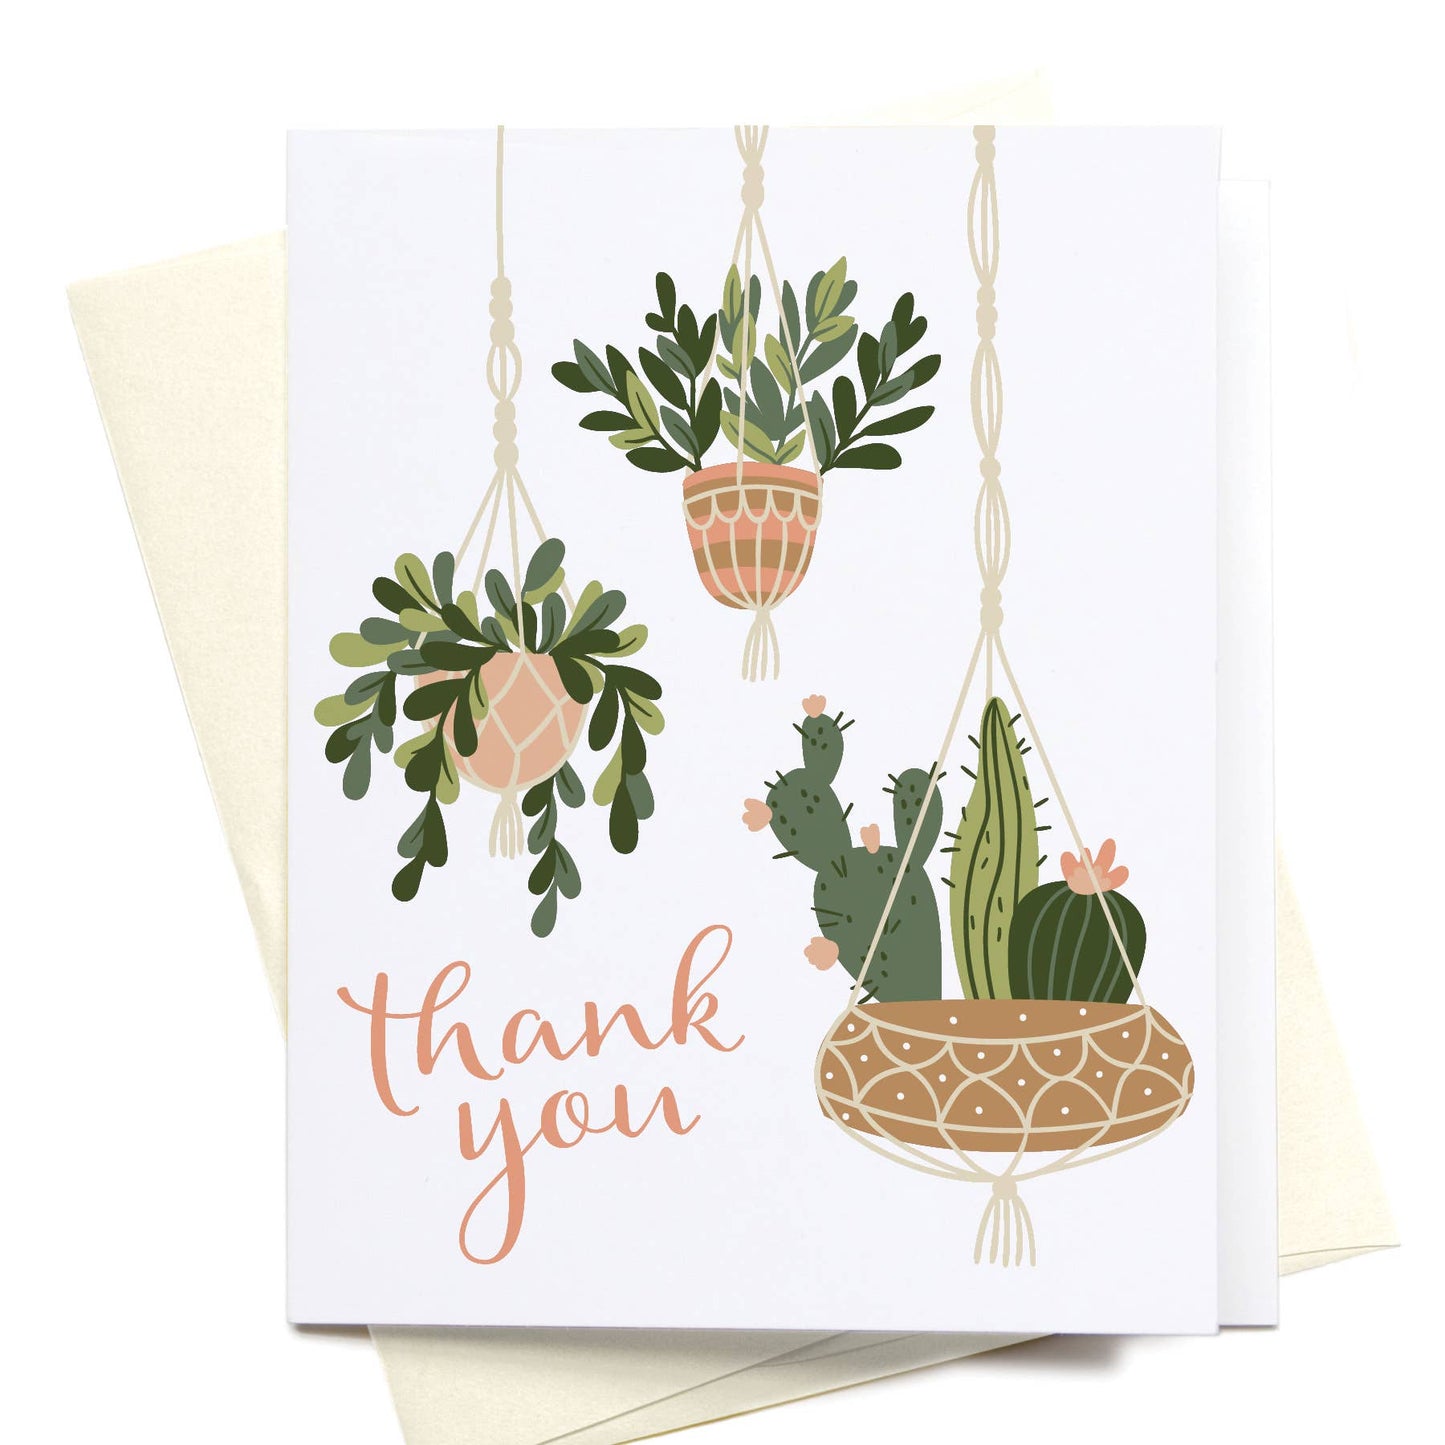 "Thank You" Hanging Plants & Succulents Greeting Card